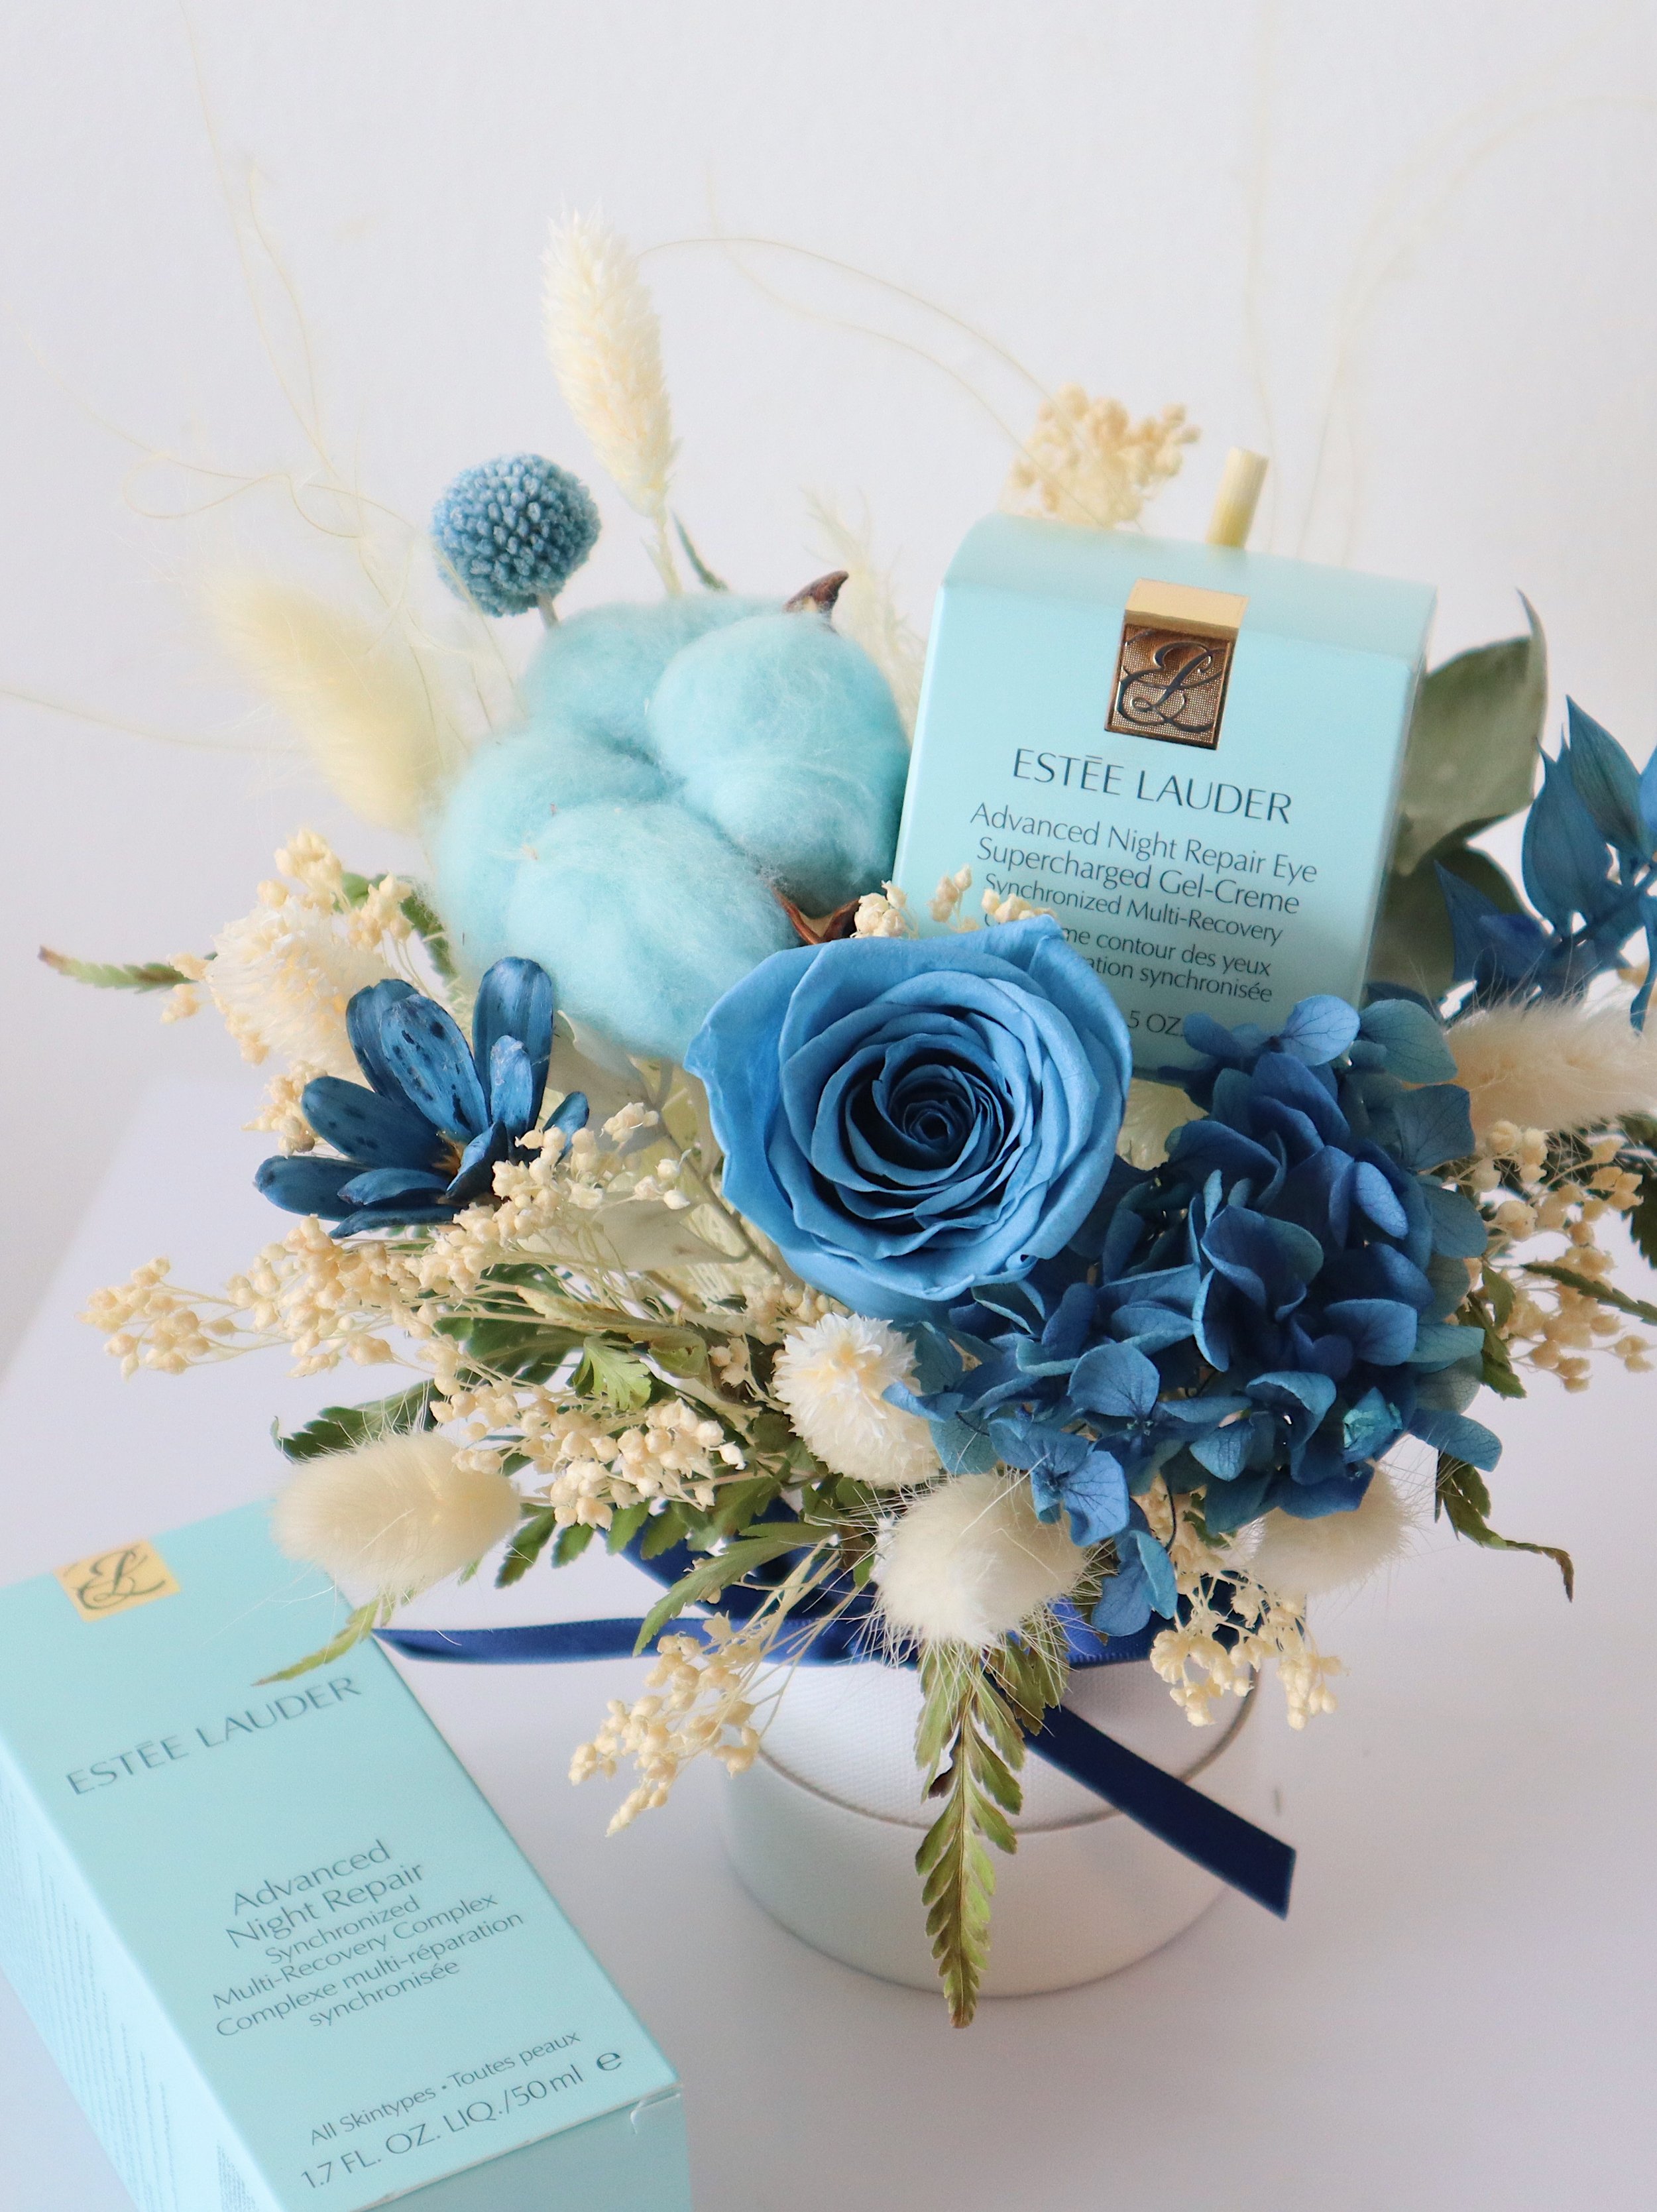 Product Floral Styling for Estee Lauder